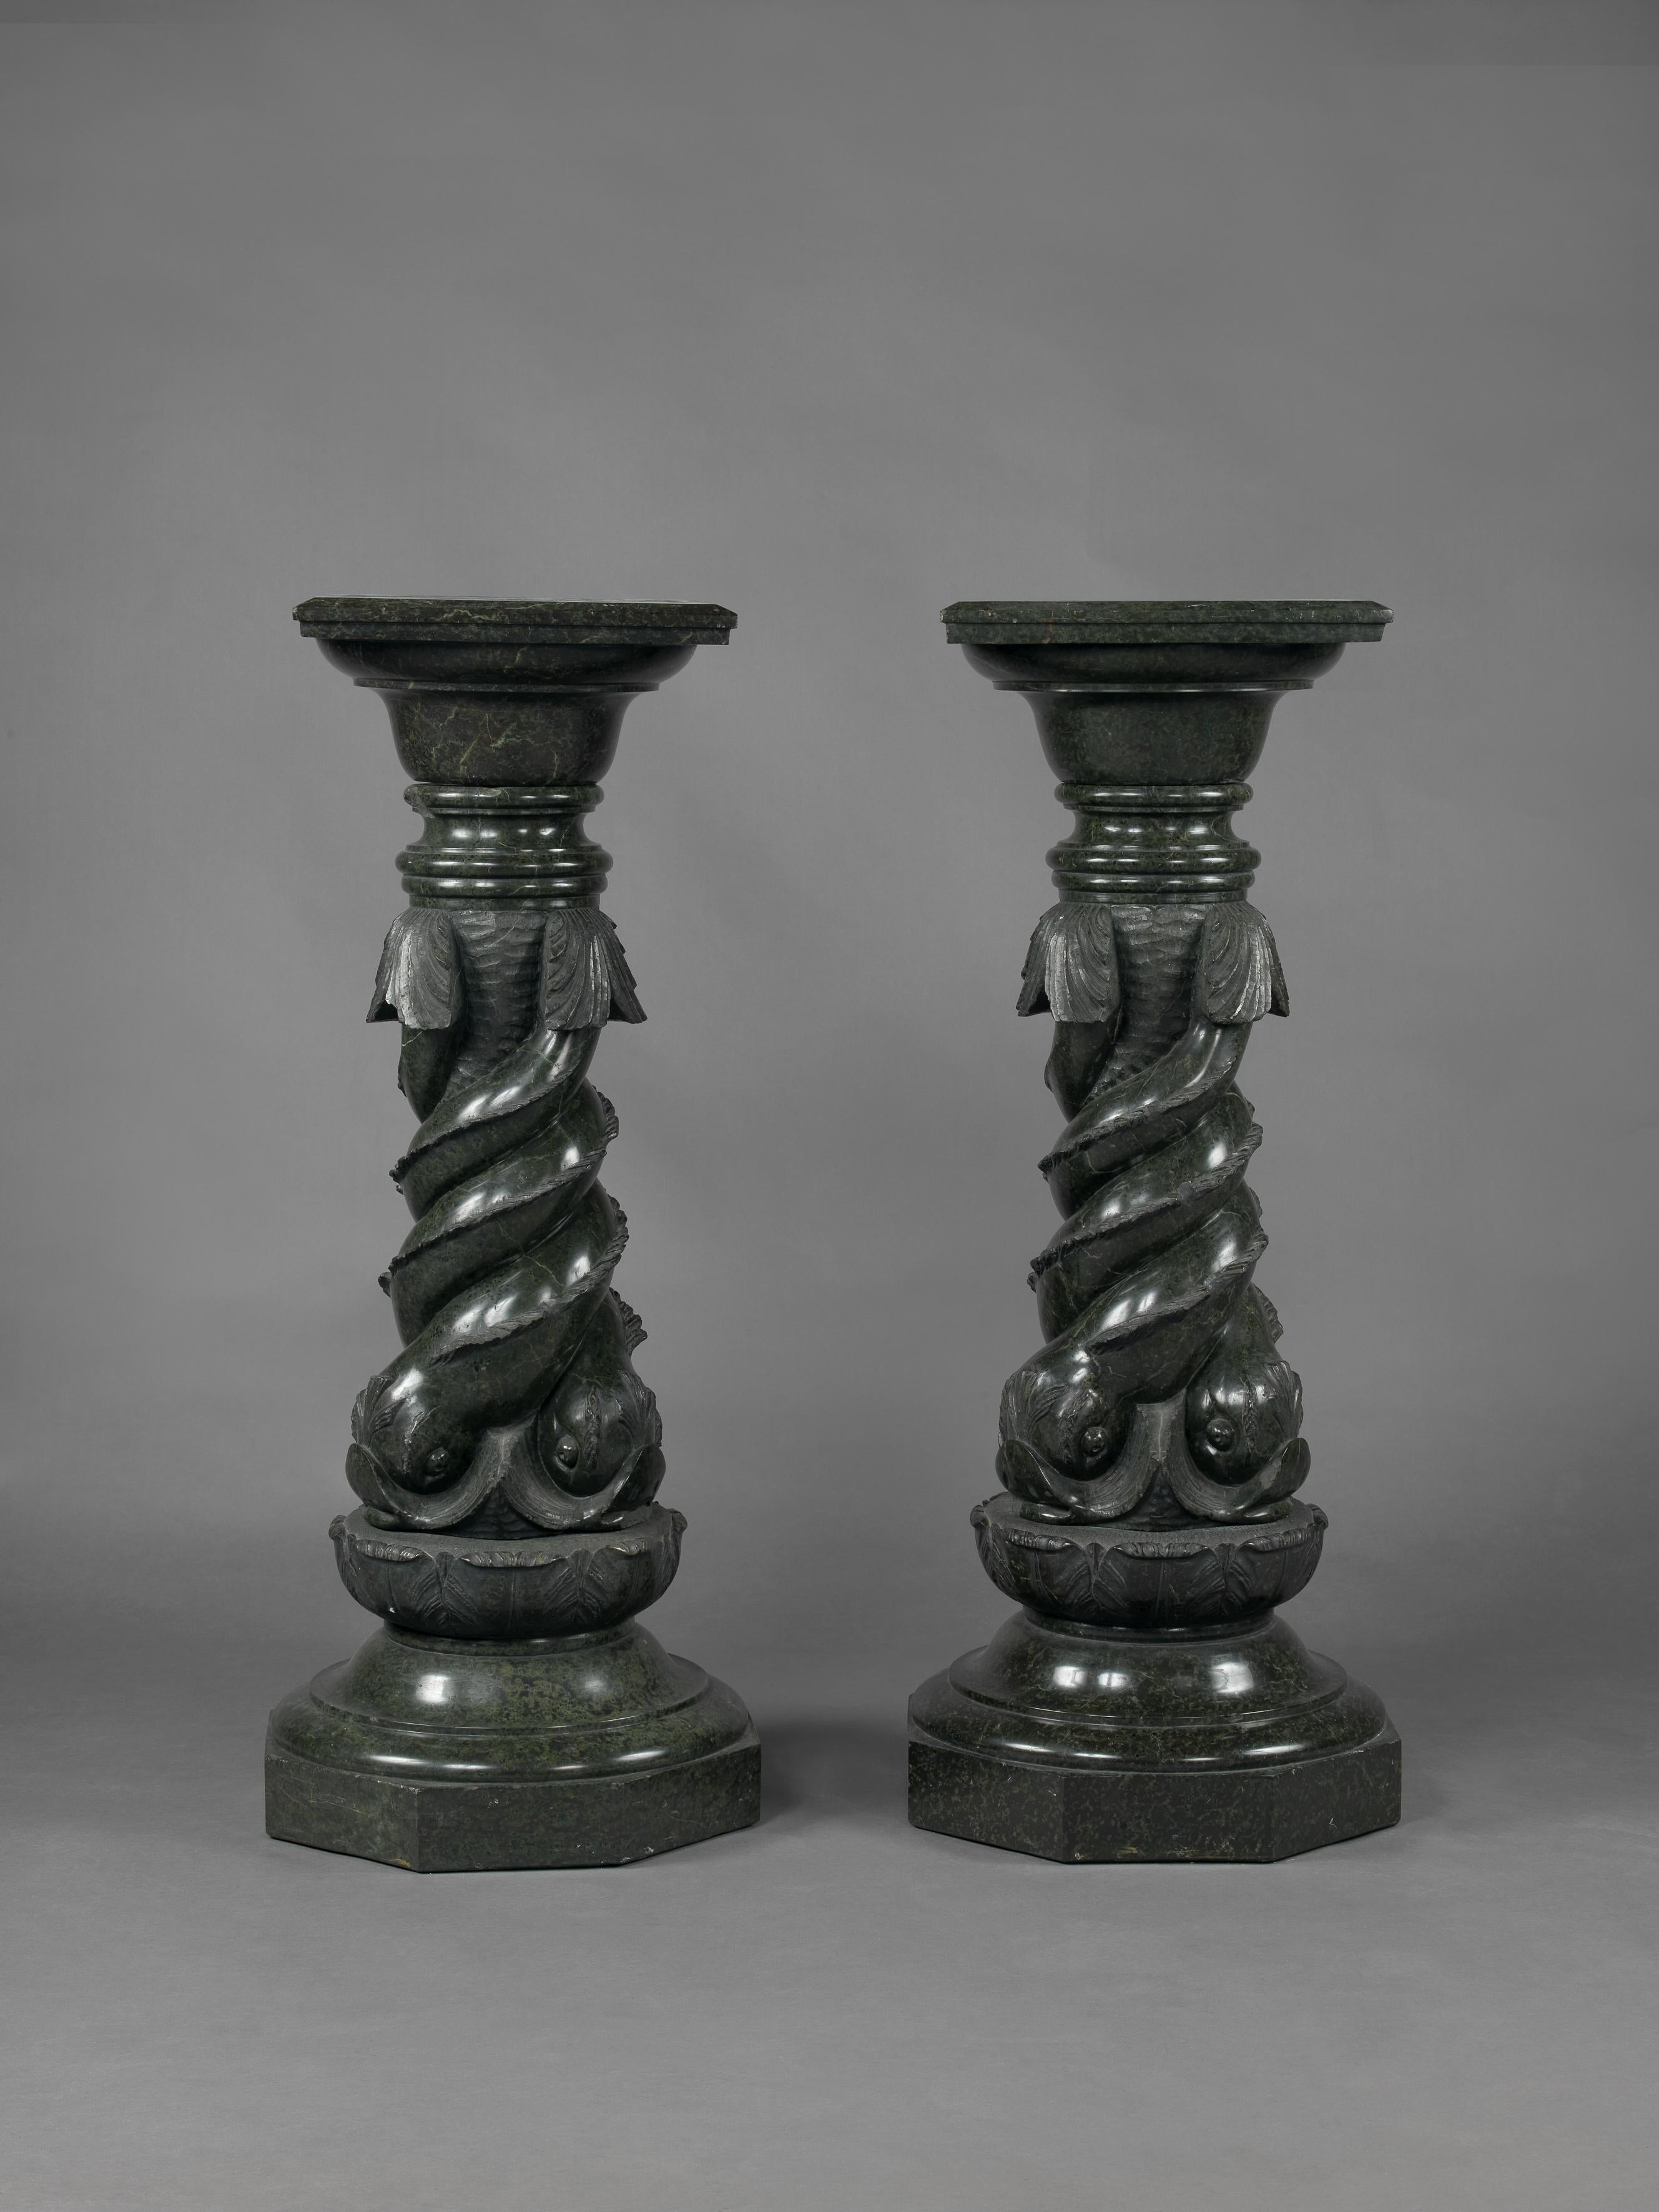 A pair of unusual green serpentine marble pedestals, carved with entwined dolphins.

Italian, circa 1880. 

This unusual pair of serpentine marble pedestals have square section tops above columns carved with expressive entwined dolphins, raised